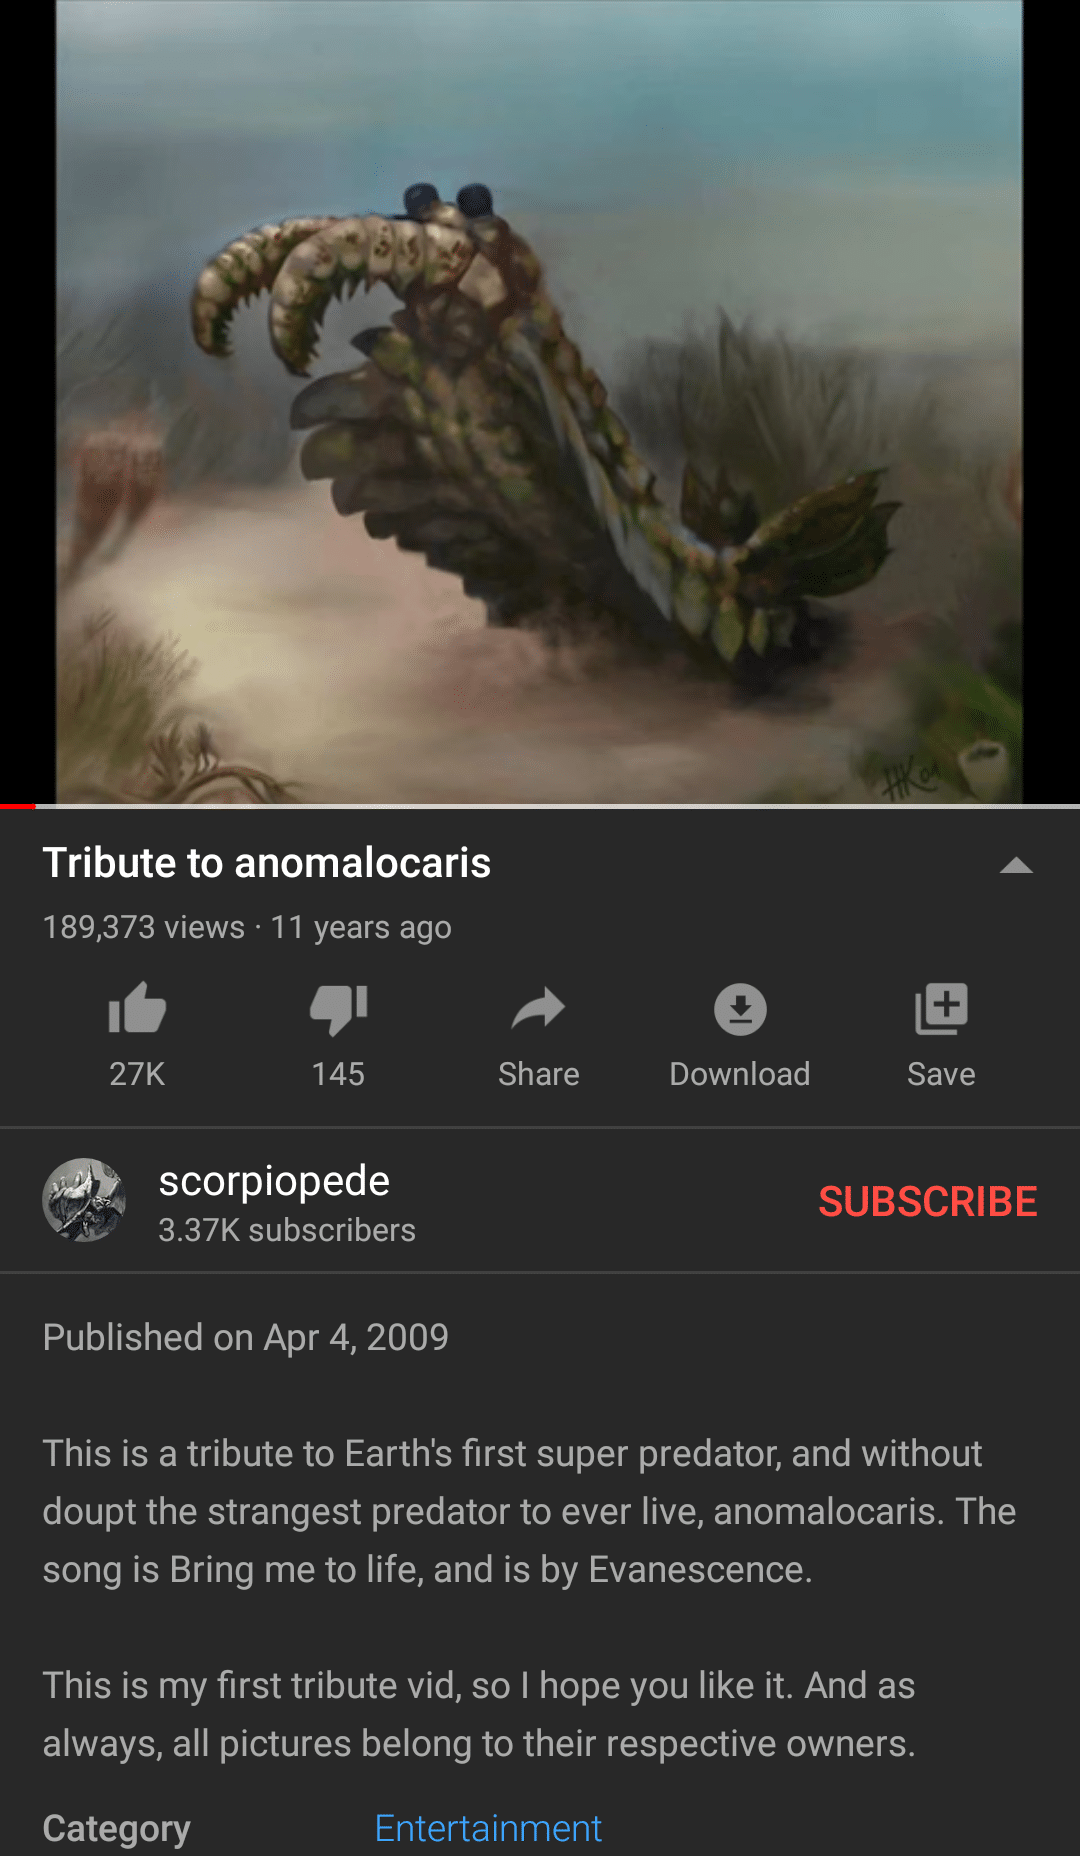 Cringe, AKE ME UP INSIDE cringe memes Cringe, AKE ME UP INSIDE text: Tribute to anomalocaris 189,373 views • 11 years ago 16 27K 145 Share o Download g Save SUBSCRIBE scorpiopede 3.37K subscribers Published on Apr 4, 2009 This is a tribute to Earth's first super predator, and without doupt the strangest predator to ever live, anomalocaris. The song is Bring me to life, and is by Evanescence. This is my first tribute vid, so I hope you like it. And as always, all pictures belong to their respective owners. Category Entertainment 